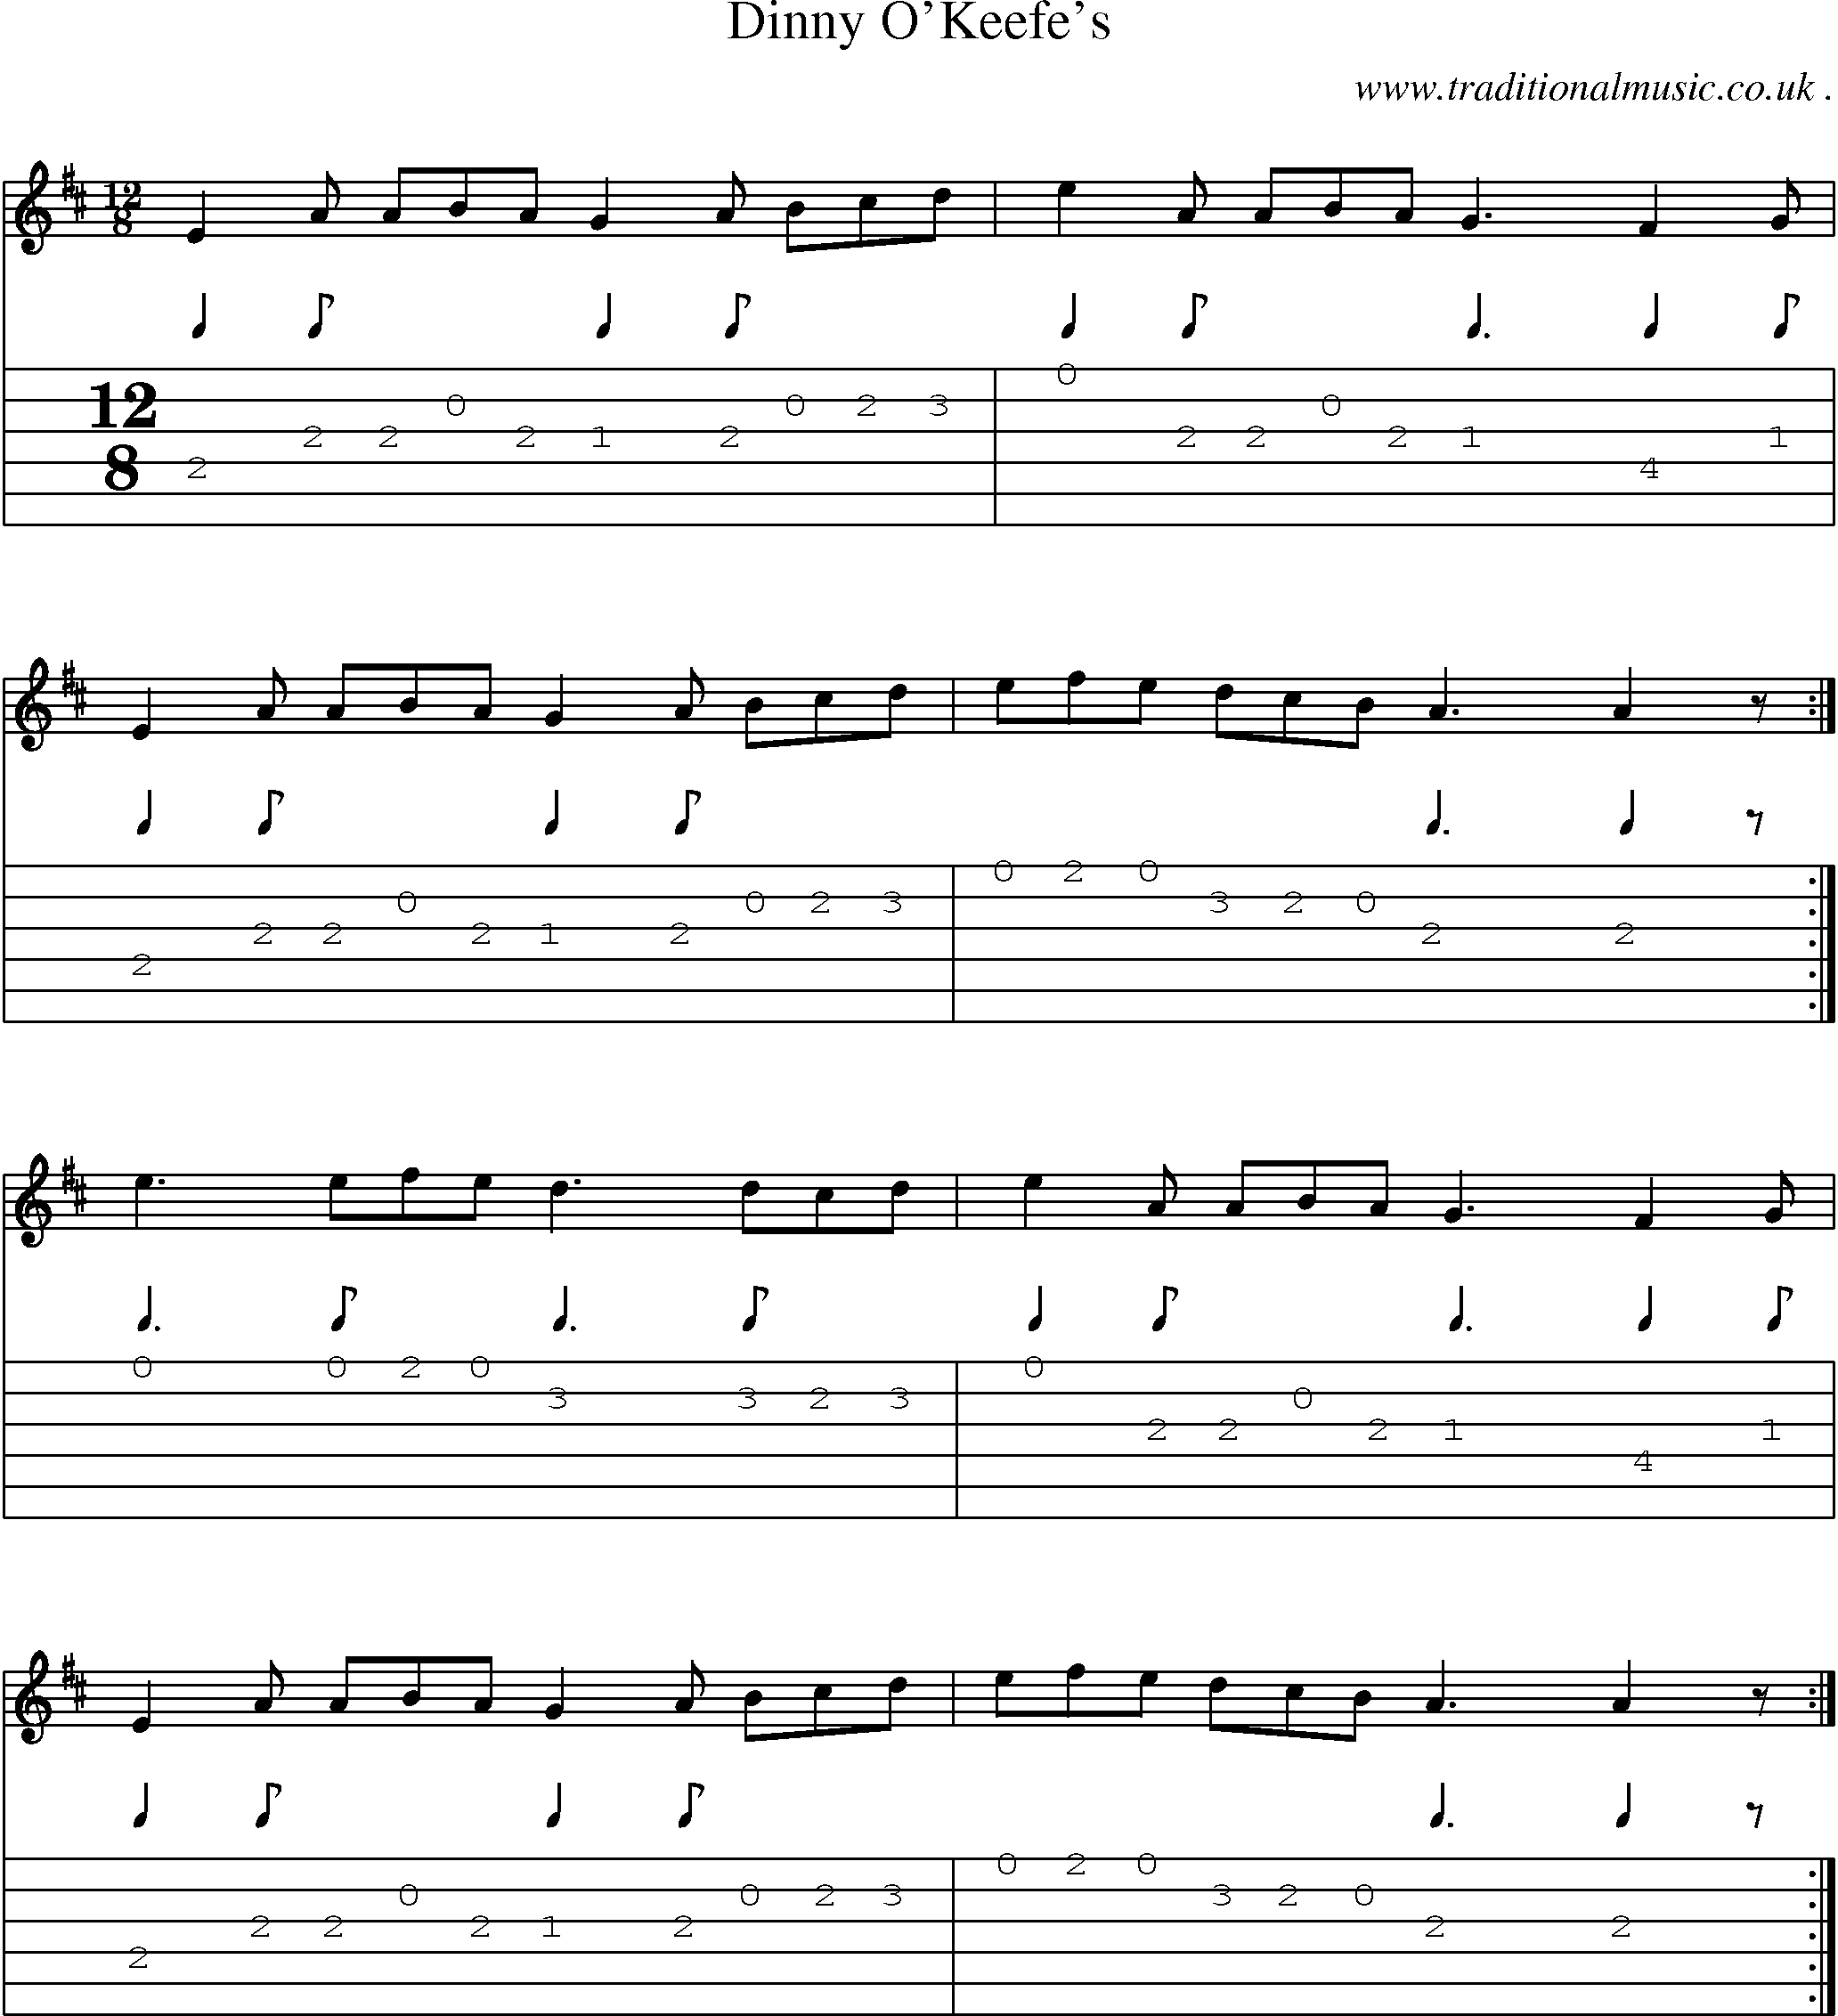 Sheet-Music and Guitar Tabs for Dinny Okeefes